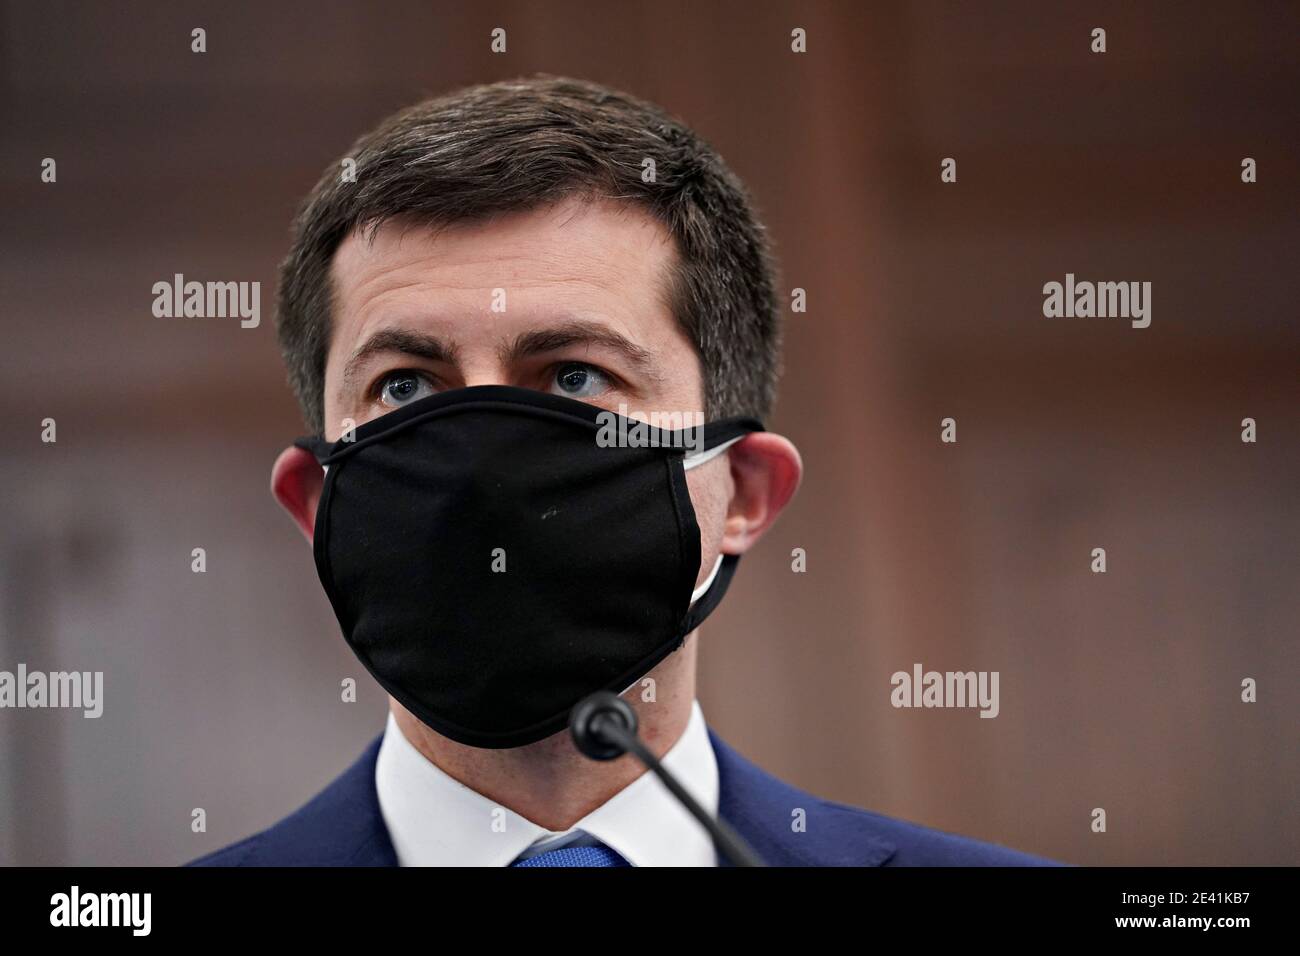 Washington, DC, USA. 21st Jan, 2021. Pete Buttigieg, U.S. secretary of transportation nominee for U.S. President Joe Biden, wears a protective mask during a Senate Commerce, Science and Transportation Committee confirmation hearing in Washington, DC, U.S., on Thursday, Jan. 21, 2021. Buttigieg, is pledging to carry out the administration's ambitious agenda to rebuild the nation's infrastructure, calling it a 'generational opportunity' to create new jobs, fight economic inequality and stem climate change. Credit: Stefani Reynolds/Pool via CNP | usage worldwide Credit: dpa/Alamy Live News Stock Photo